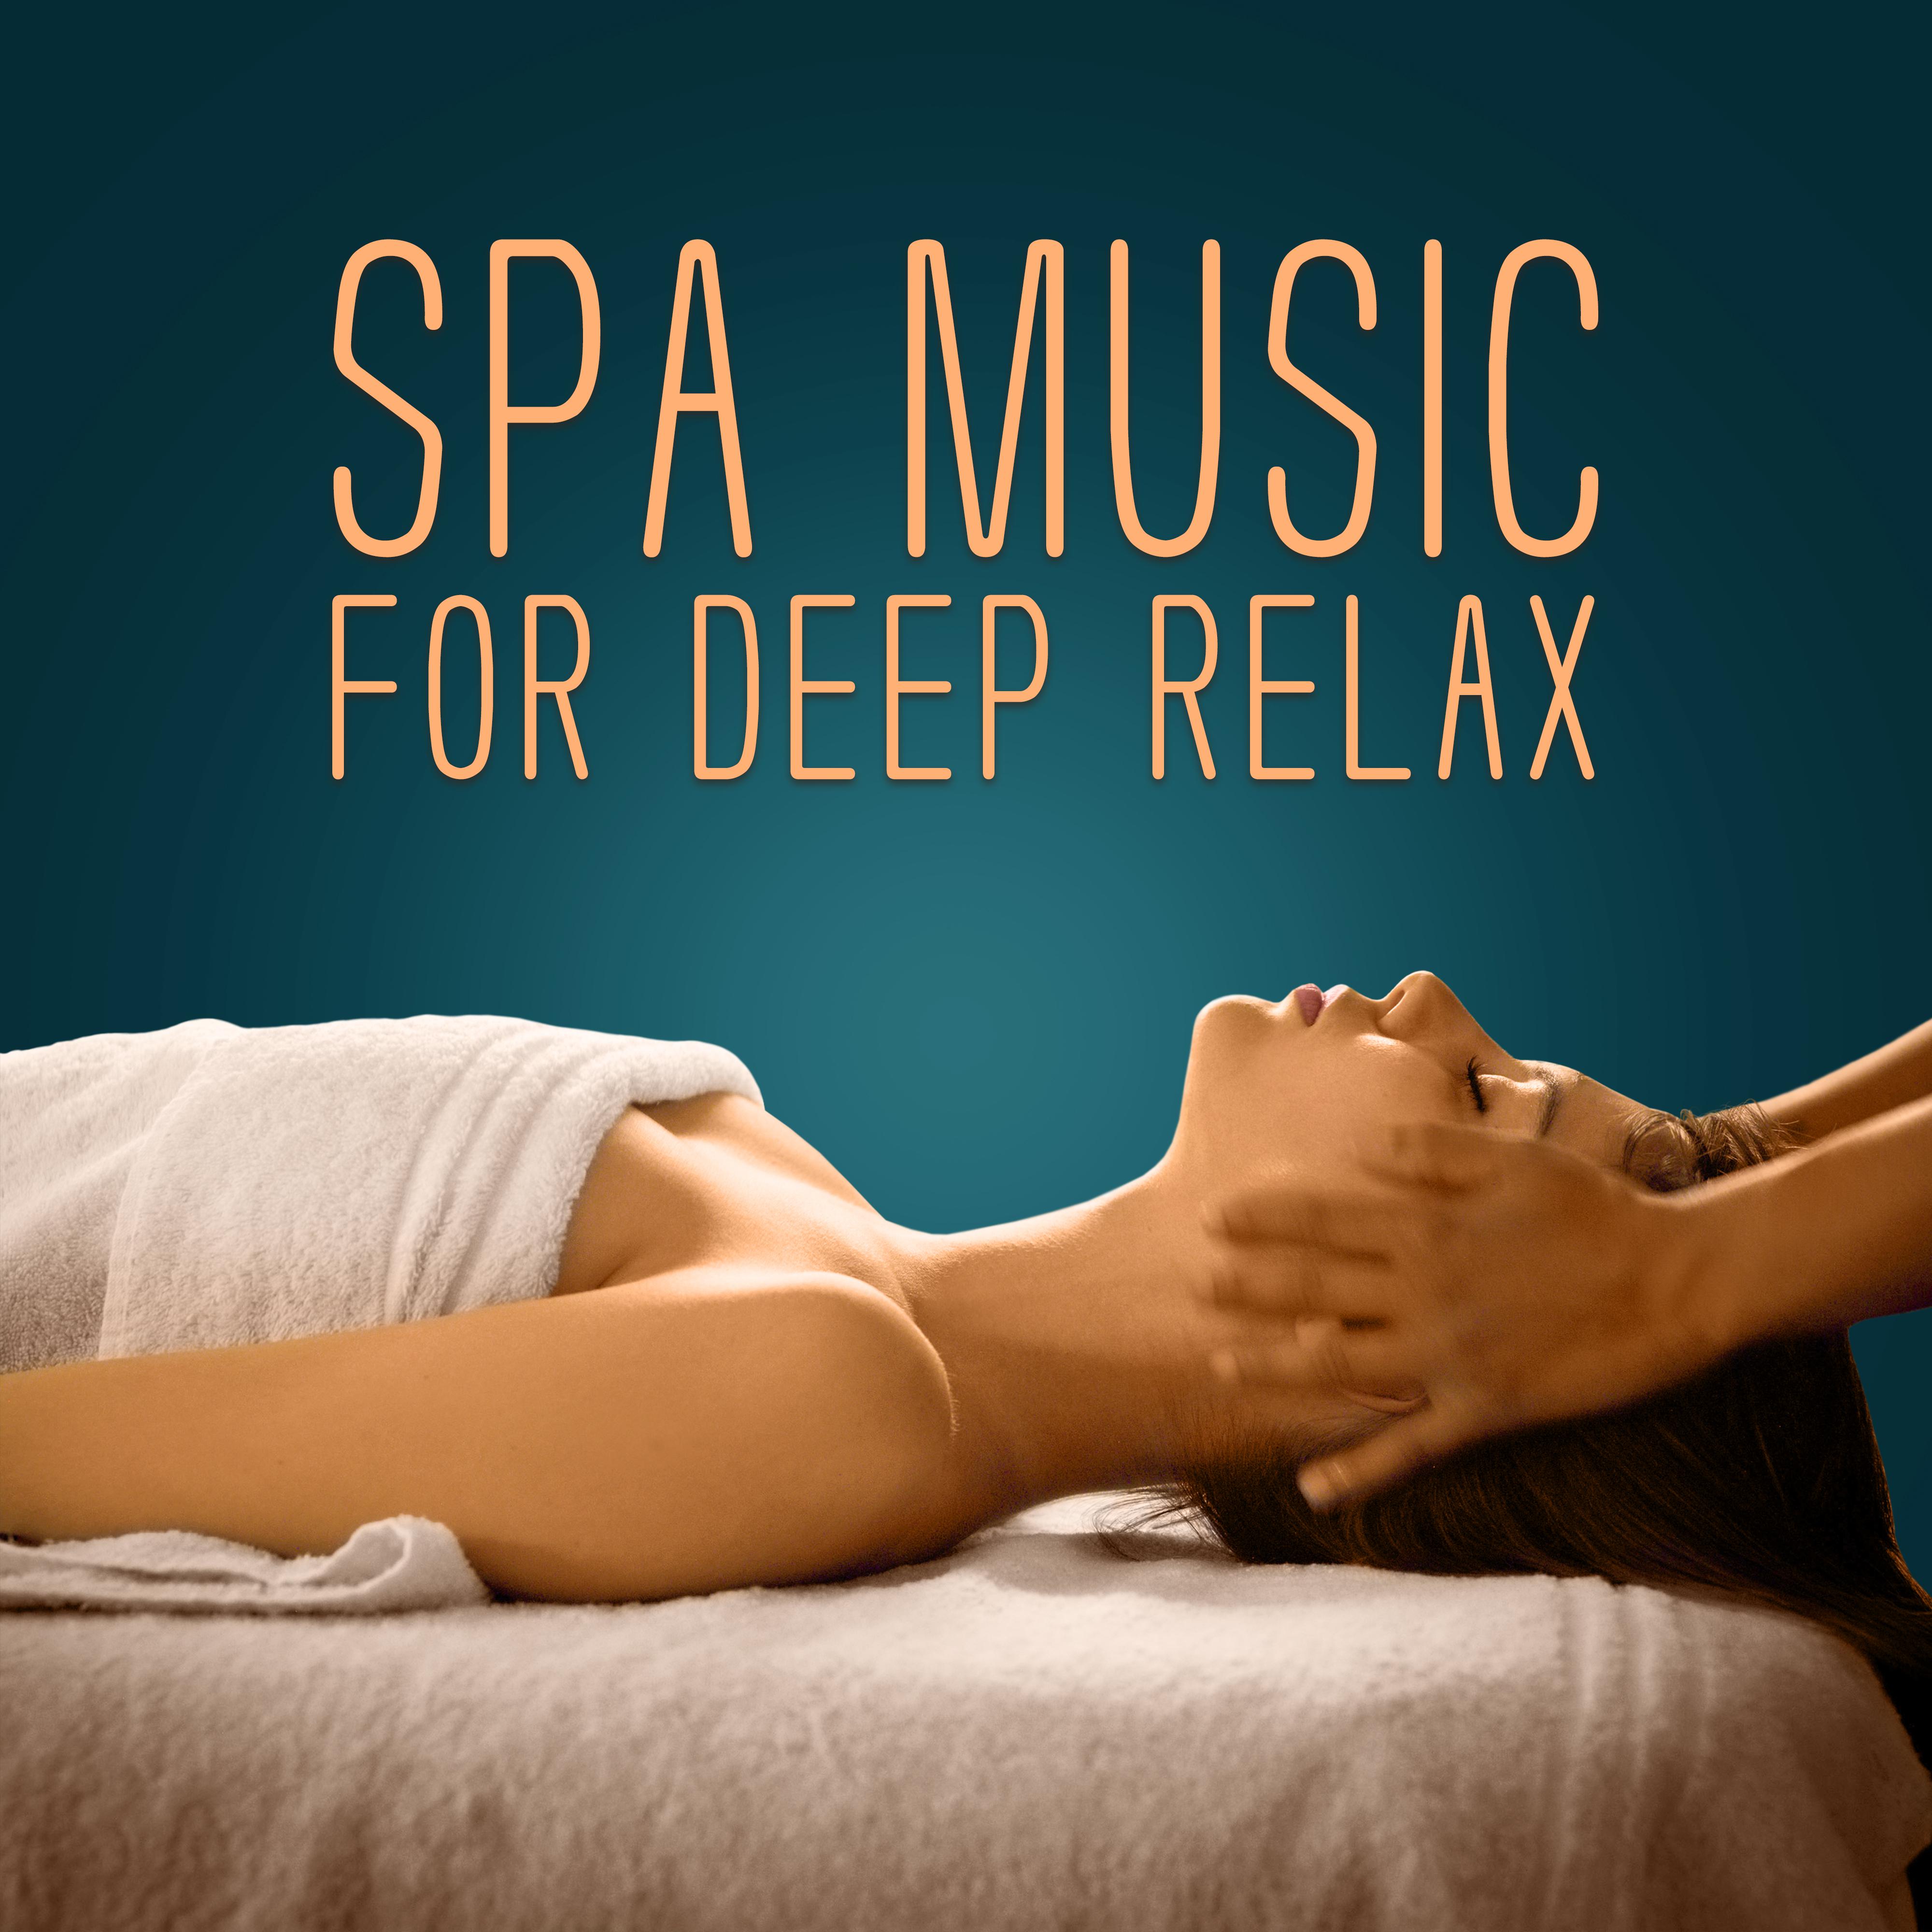 Spa Music for Deep Relax  Easy Listening, Spa Relaxation, Stress Relief, Peaceful Songs, Rest with New Age